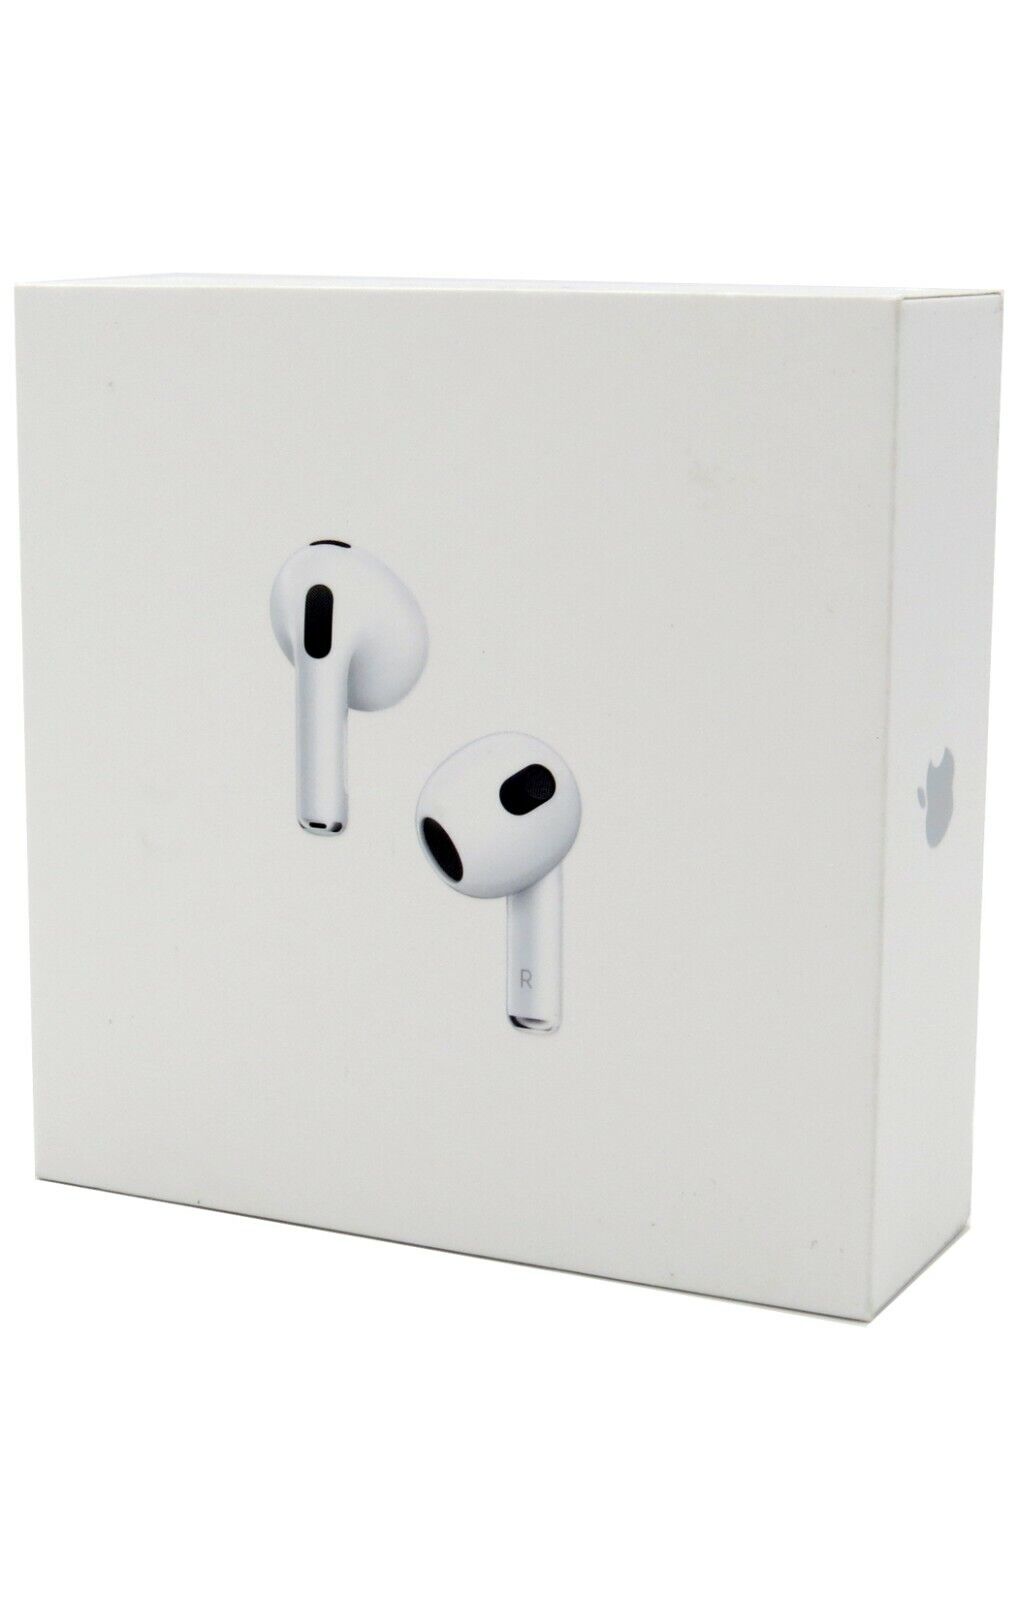 (Open Box) Apple AirPods Wireless Earbuds w/ Charging Case (3rd Gen) $115 + Free Shipping